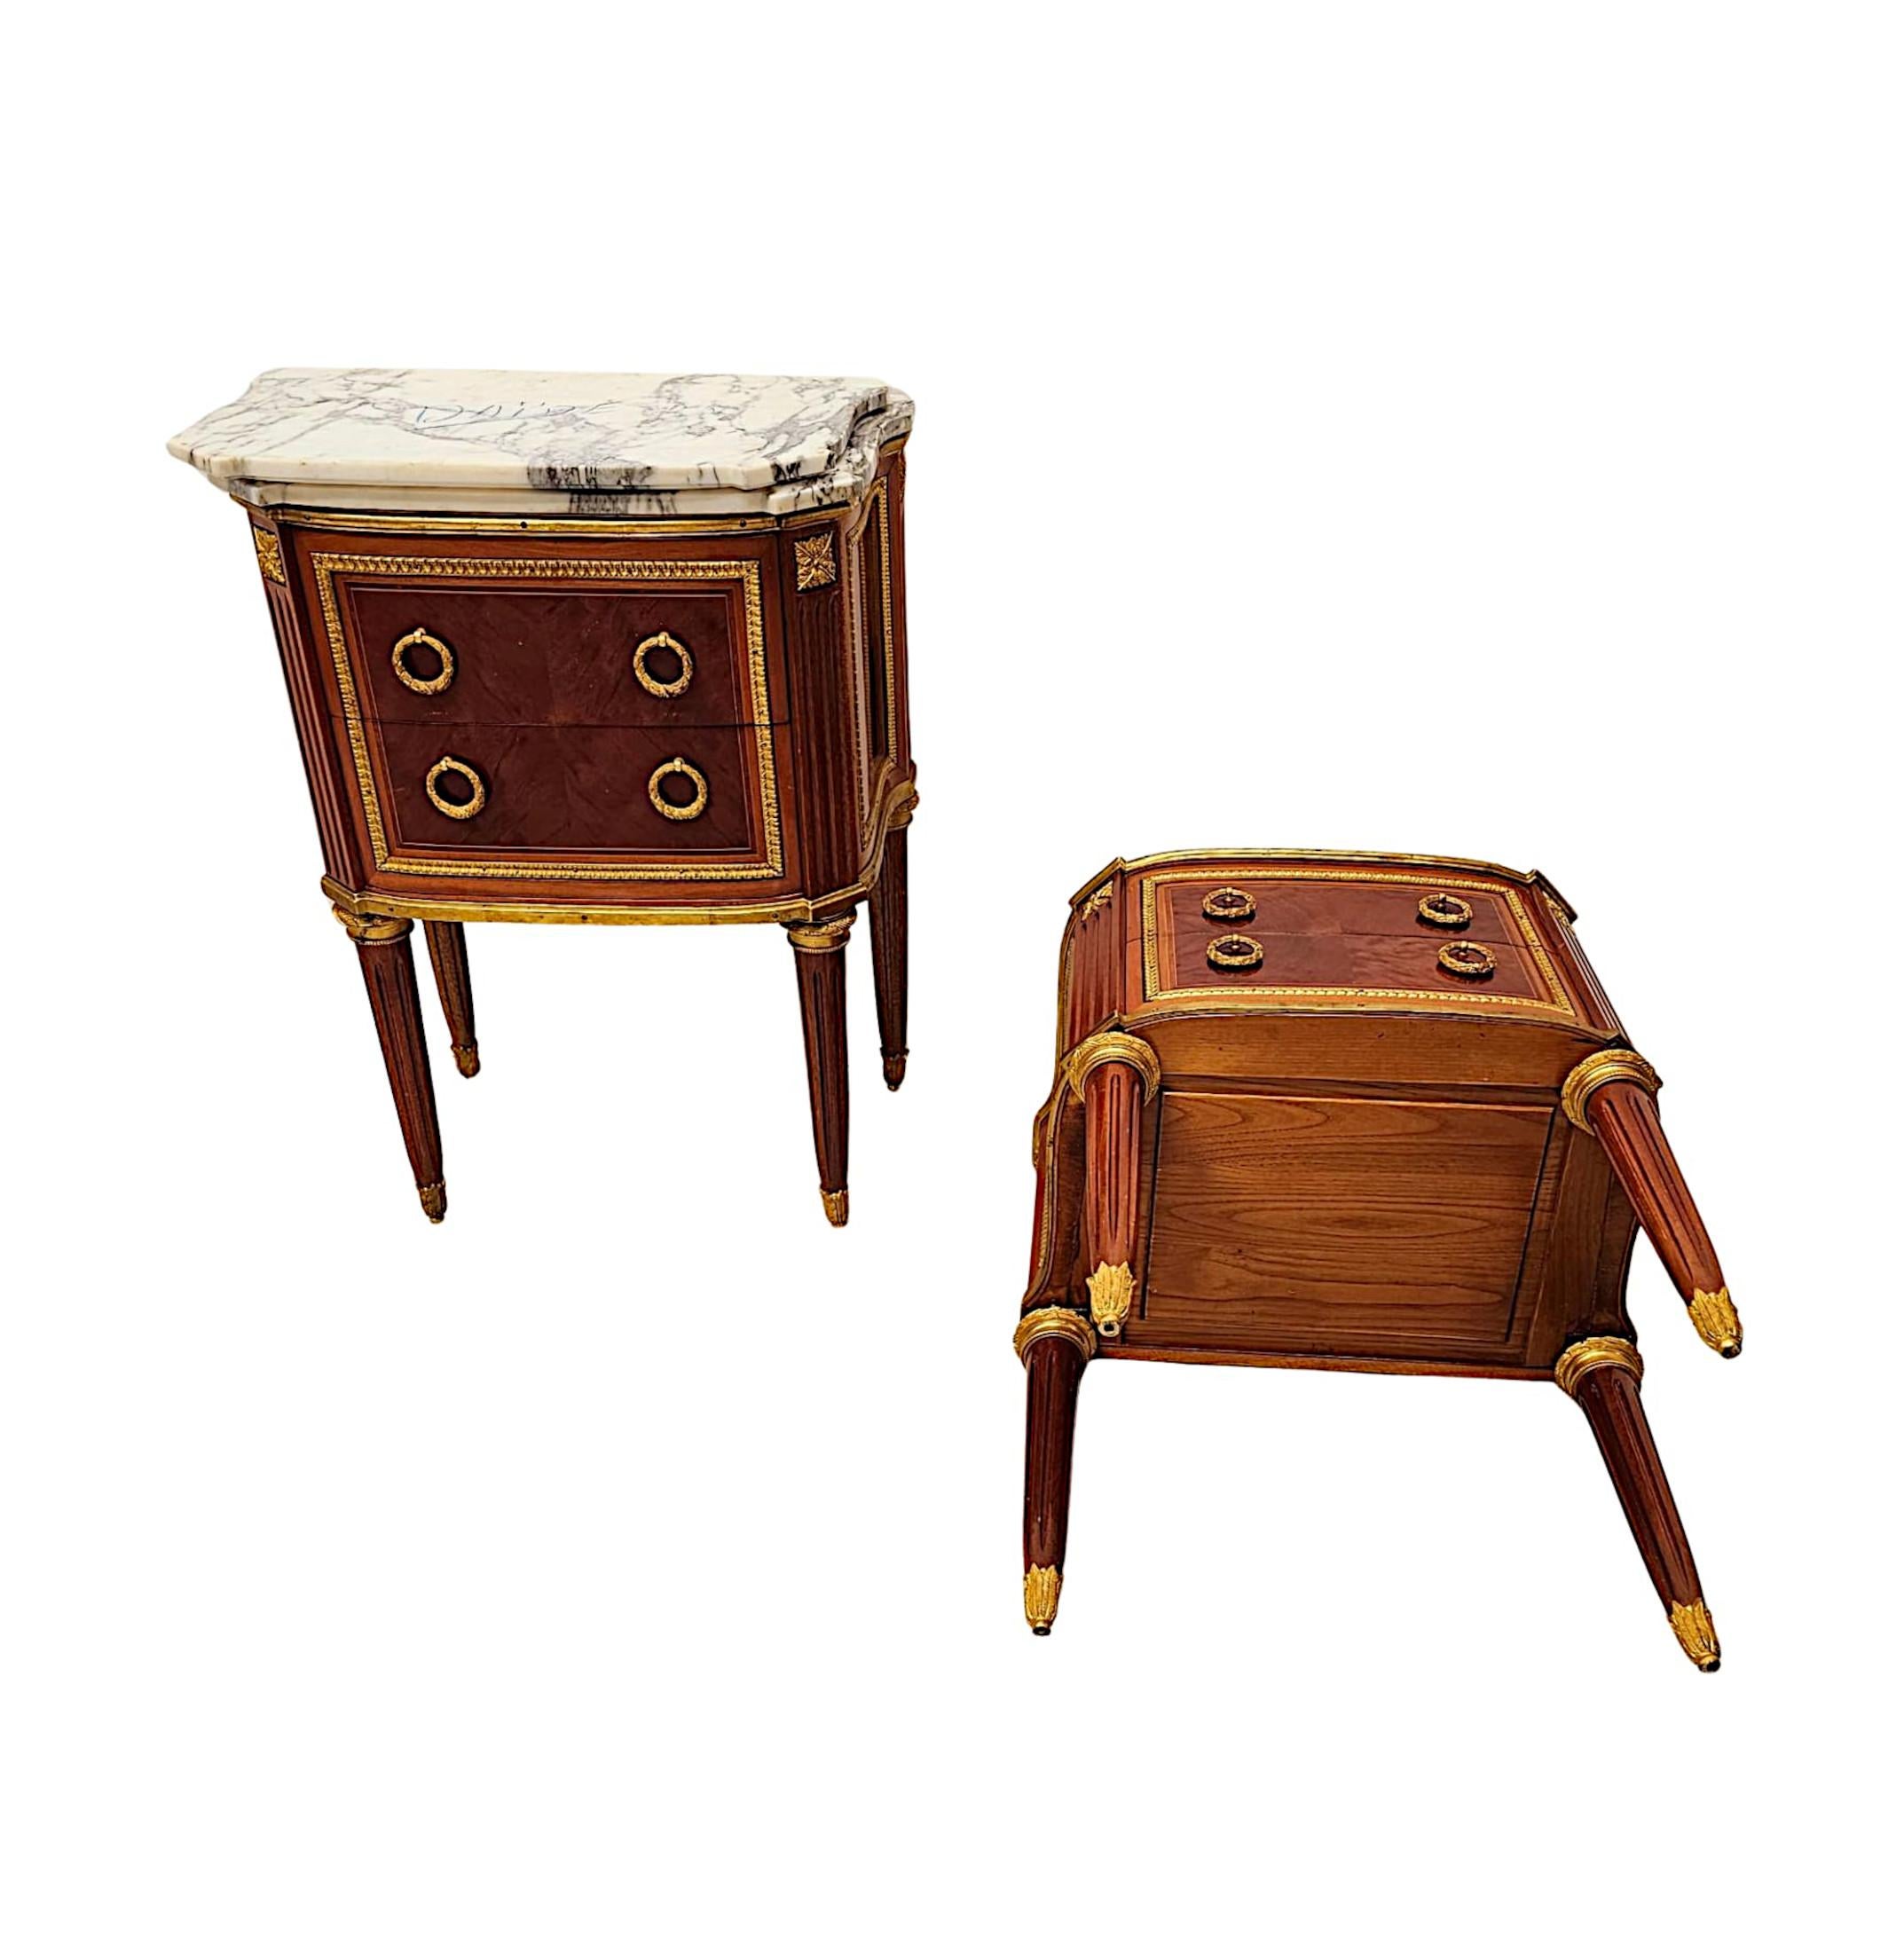 A  Fine 20th Century Pair of Marble Top Side Tables or Chests with Ormolu Mounts For Sale 3